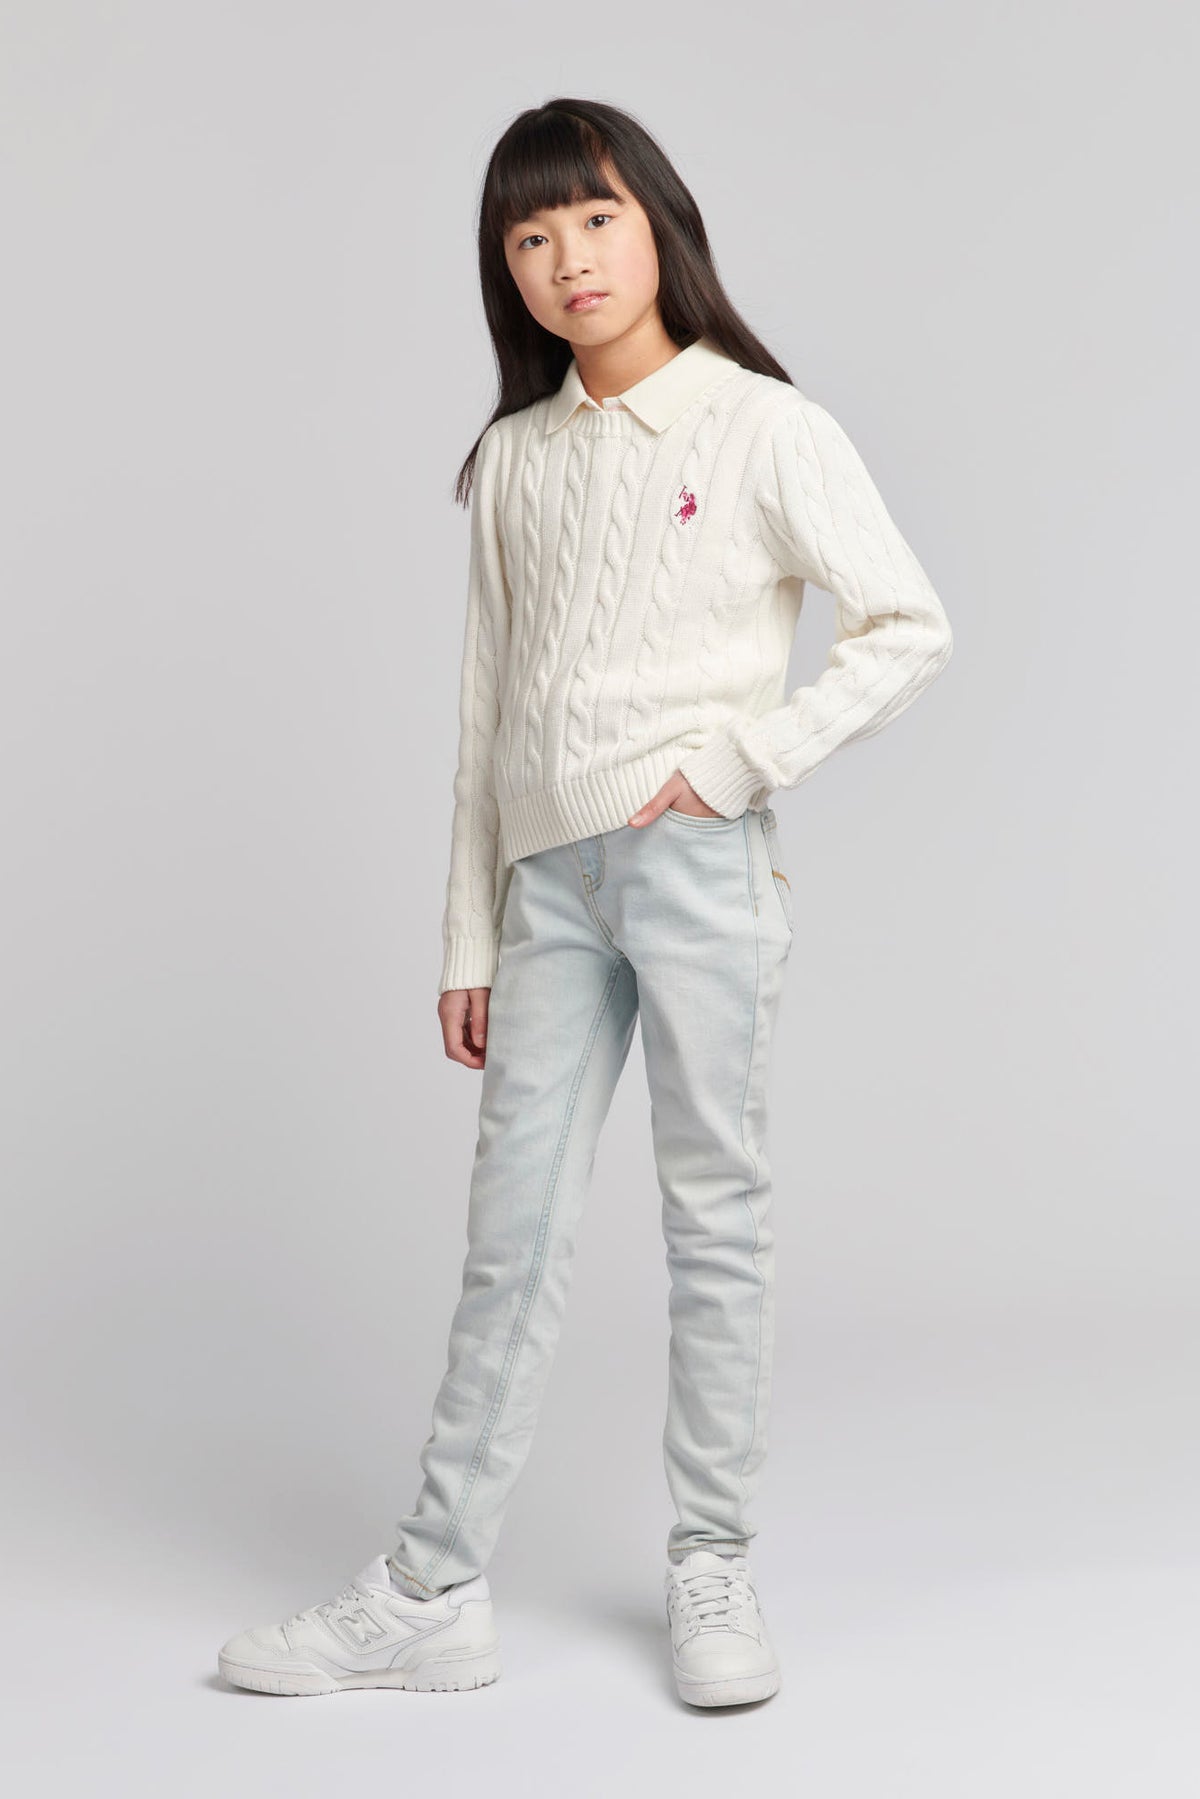 Girls Crew Neck Cable Knit Jumper in Marshmallow